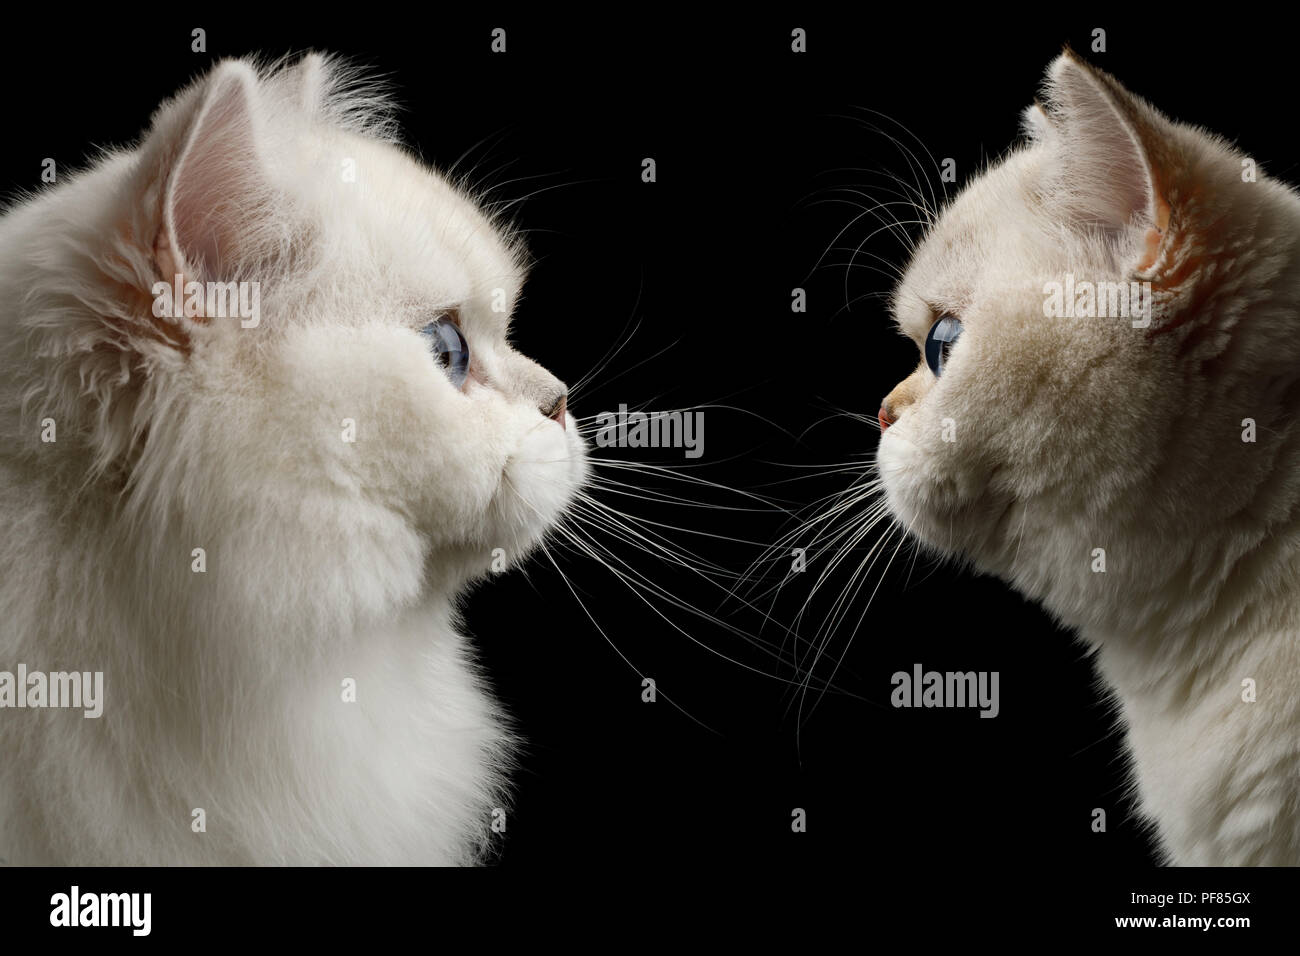 Portrait of Twi British breed Cats White color with Blue eyes, Stare at side on Isolated Black Background, profile view Stock Photo